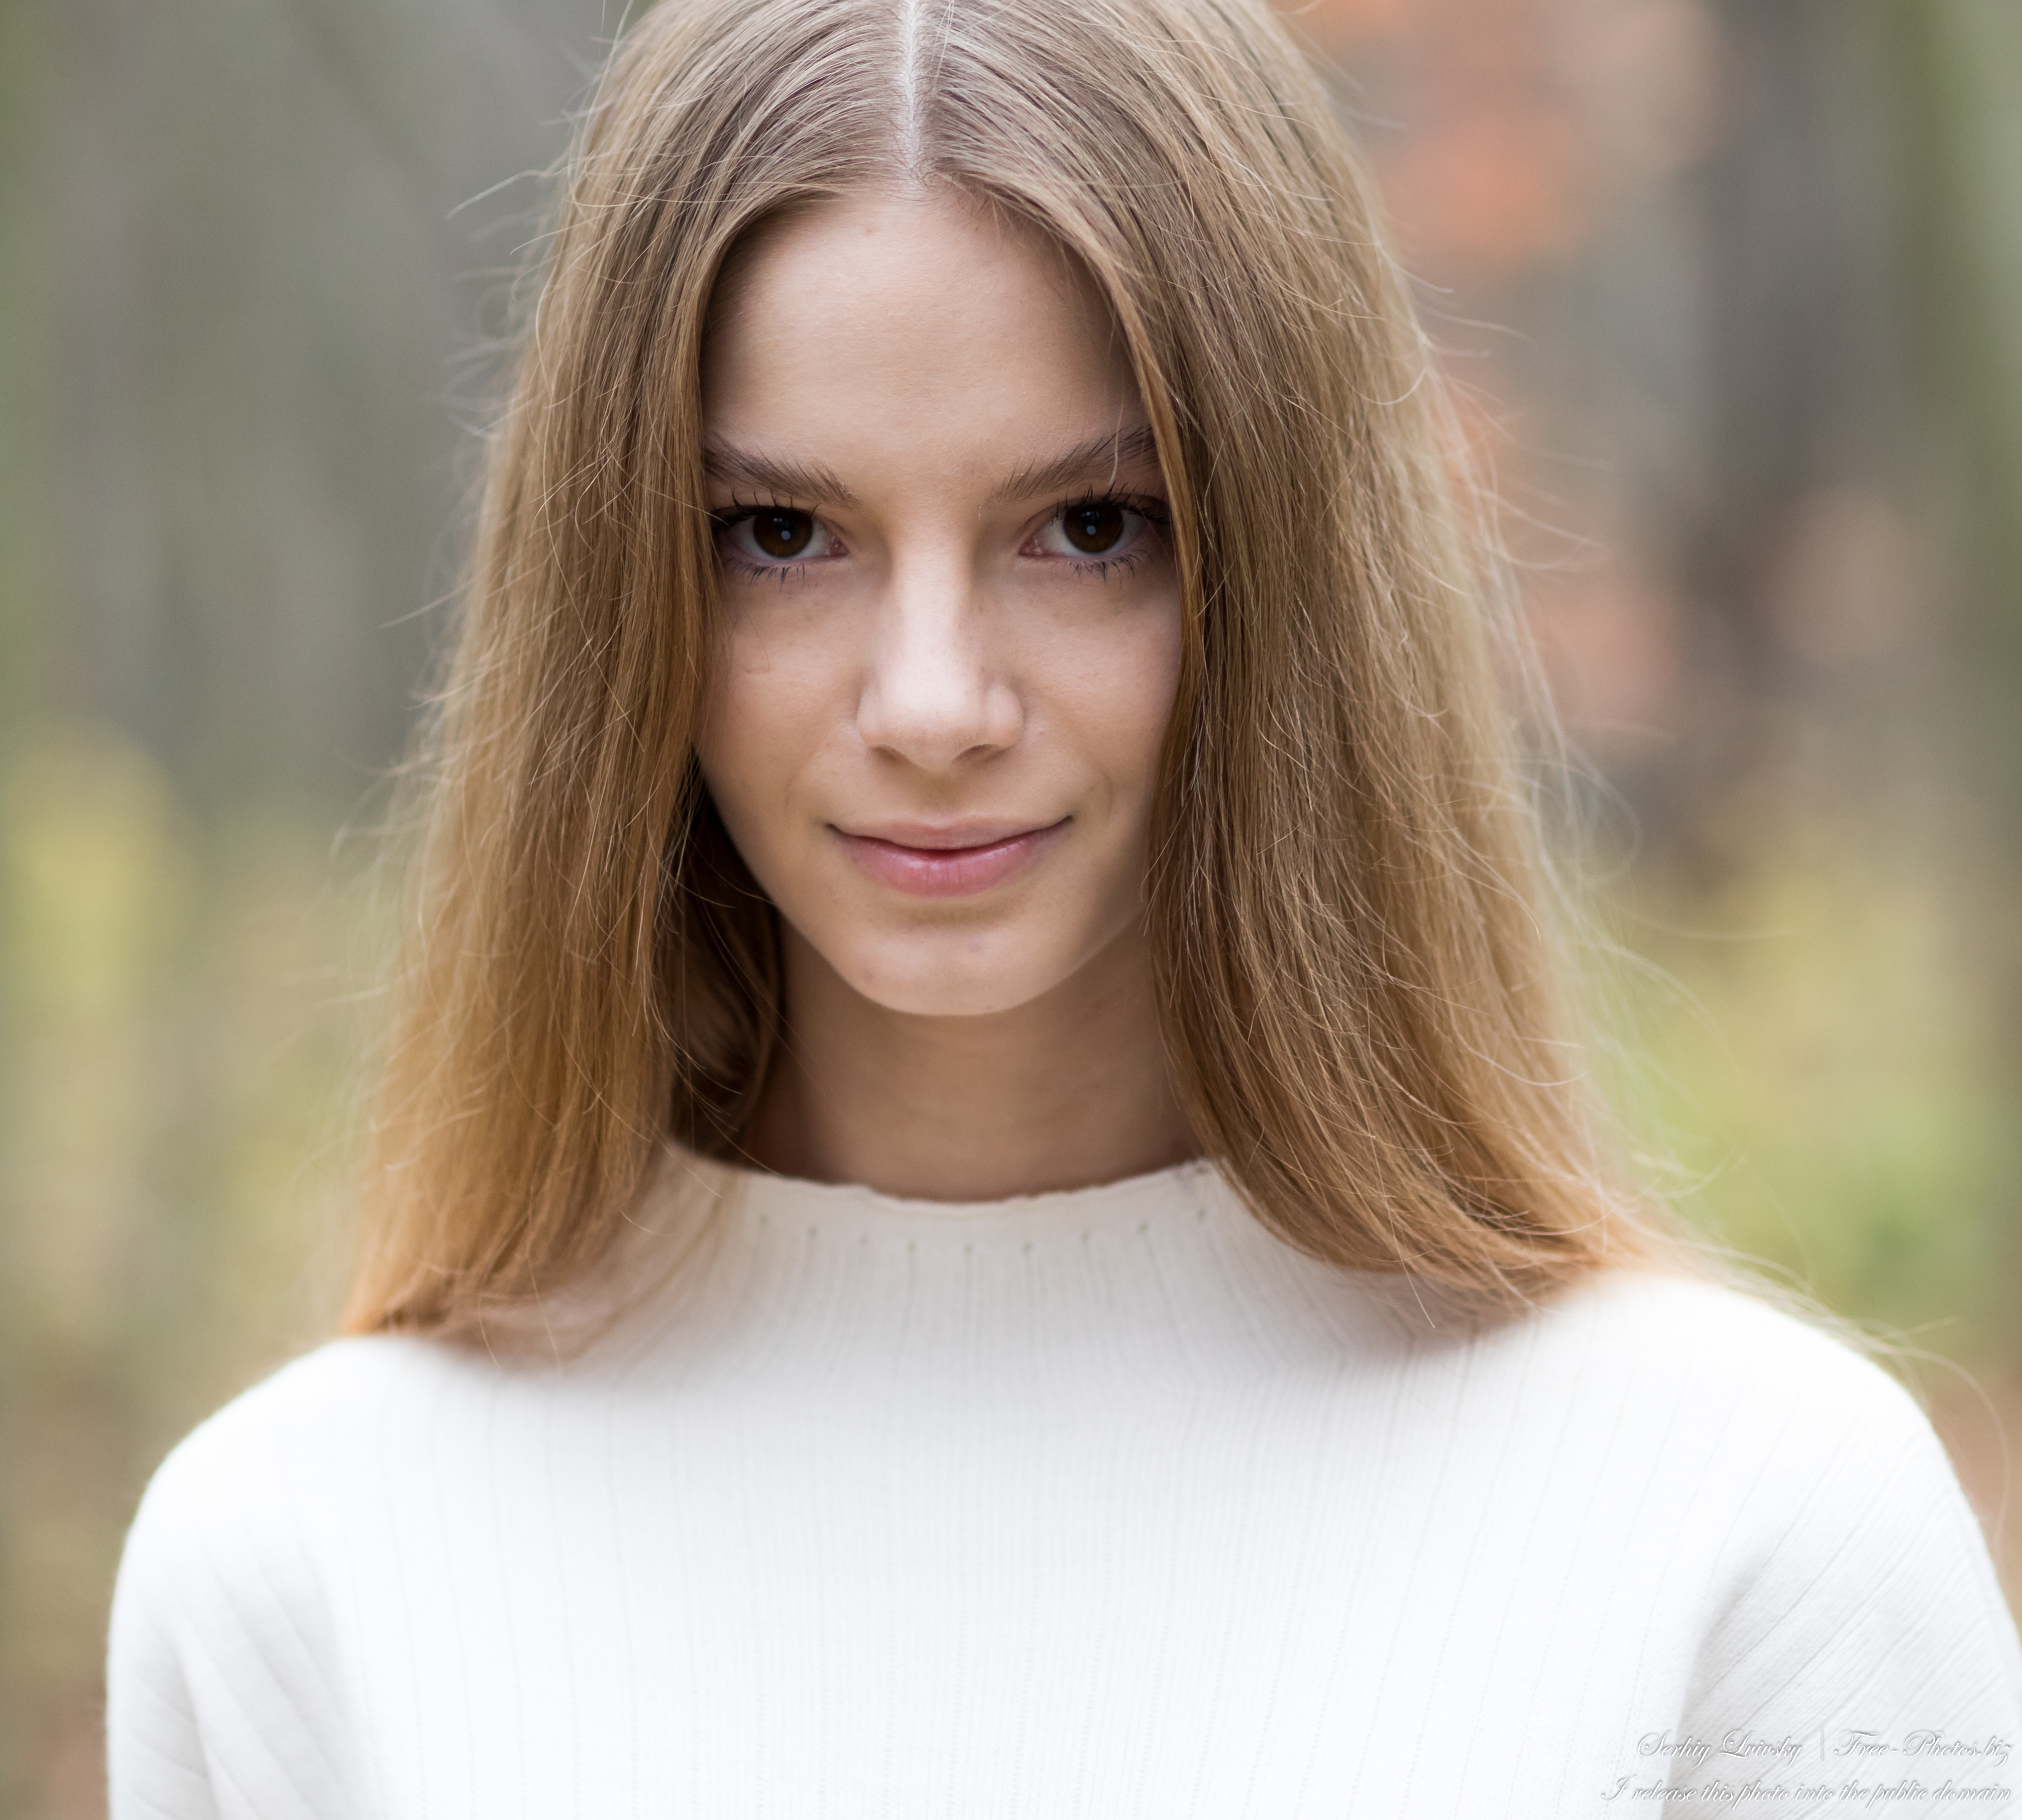 Vika - an 18-year-old God's creation with natural fair hair, photographed by Serhiy Lvivsky in November 2022, picture 30